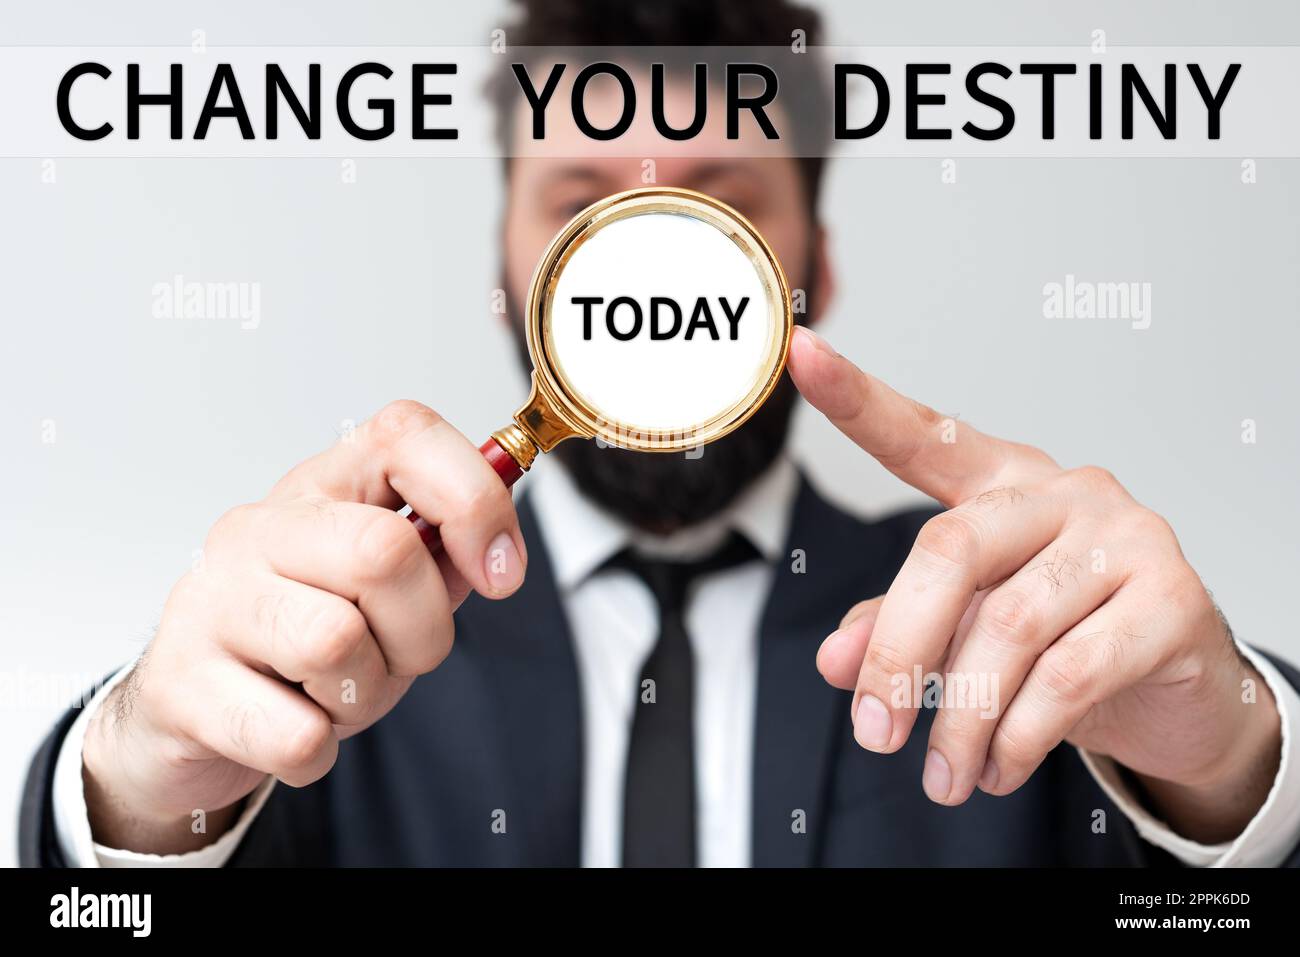 Conceptual caption Change Your Destiny. Business concept choosing the right actions to manipulate predetermined events Stock Photo